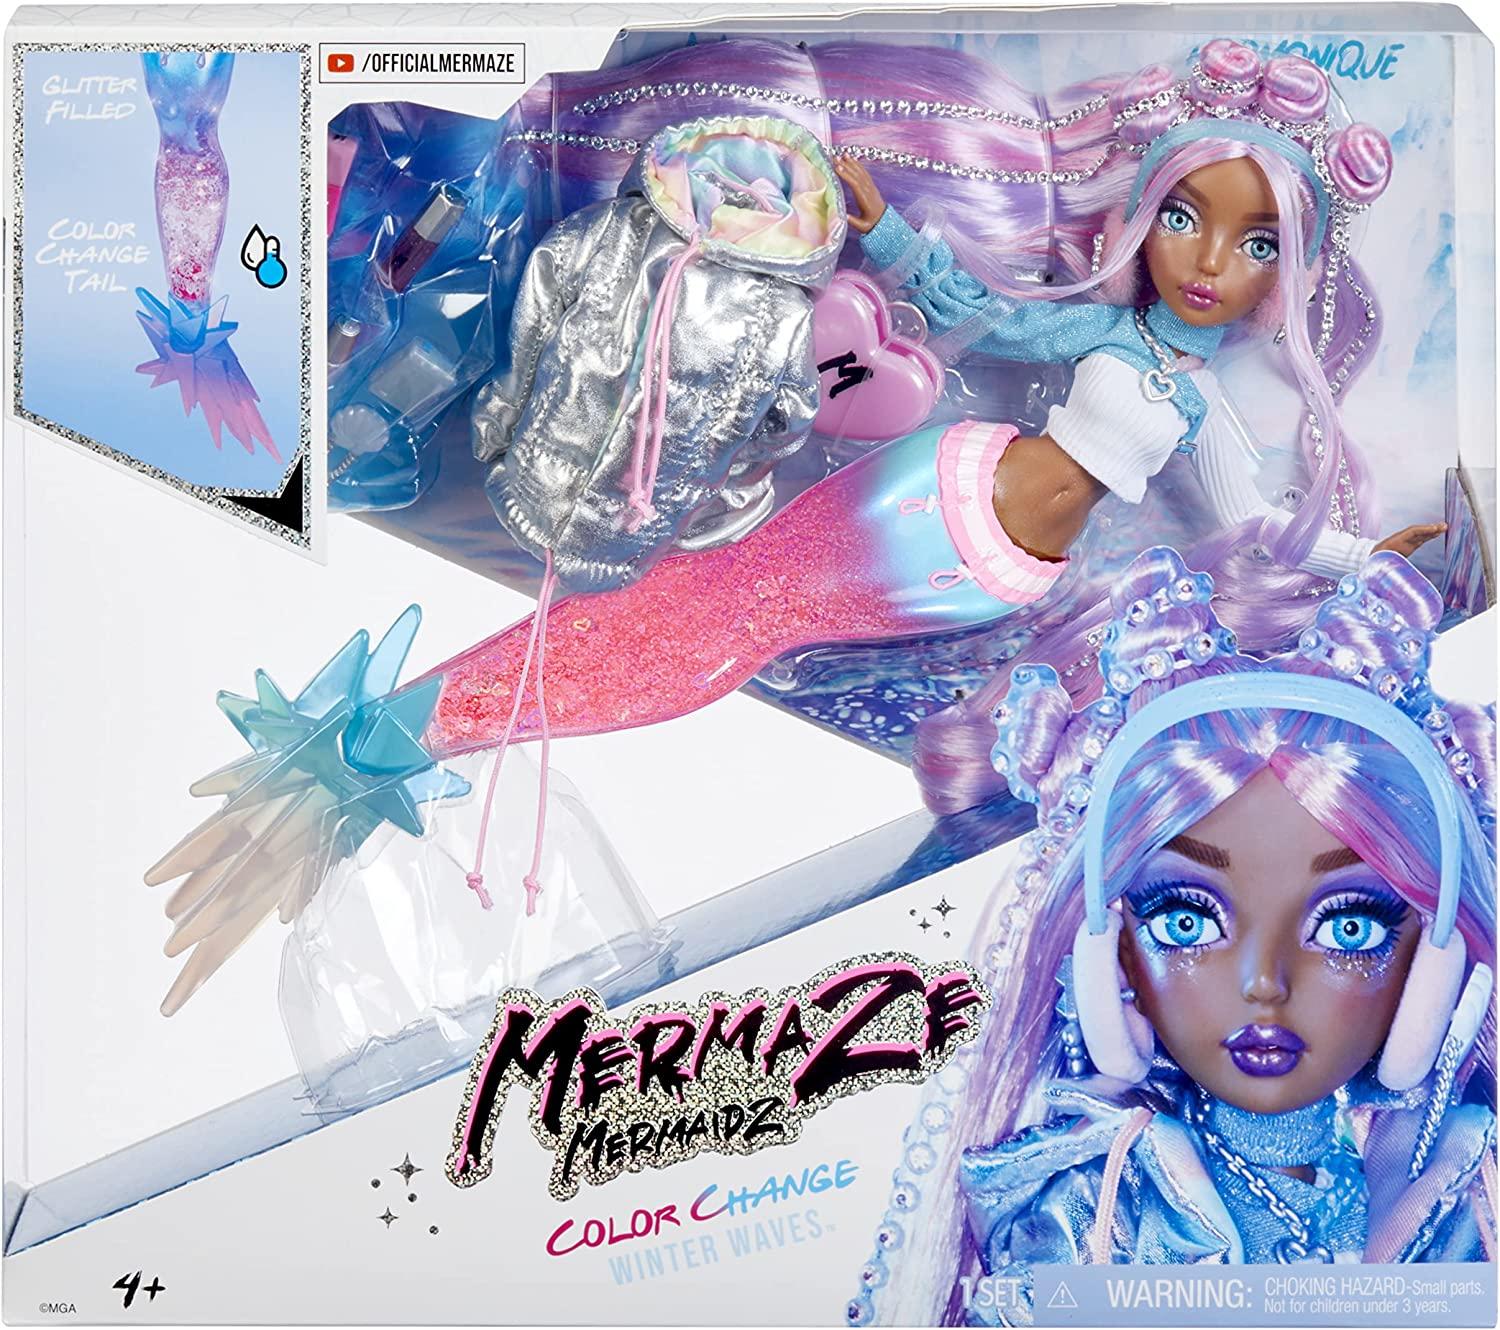 Mermaze Mermaidz™ Winter Waves Harmonique™ Mermaid Fashion Doll with Color Change Fin, Glitter-Filled Tail and Accessories